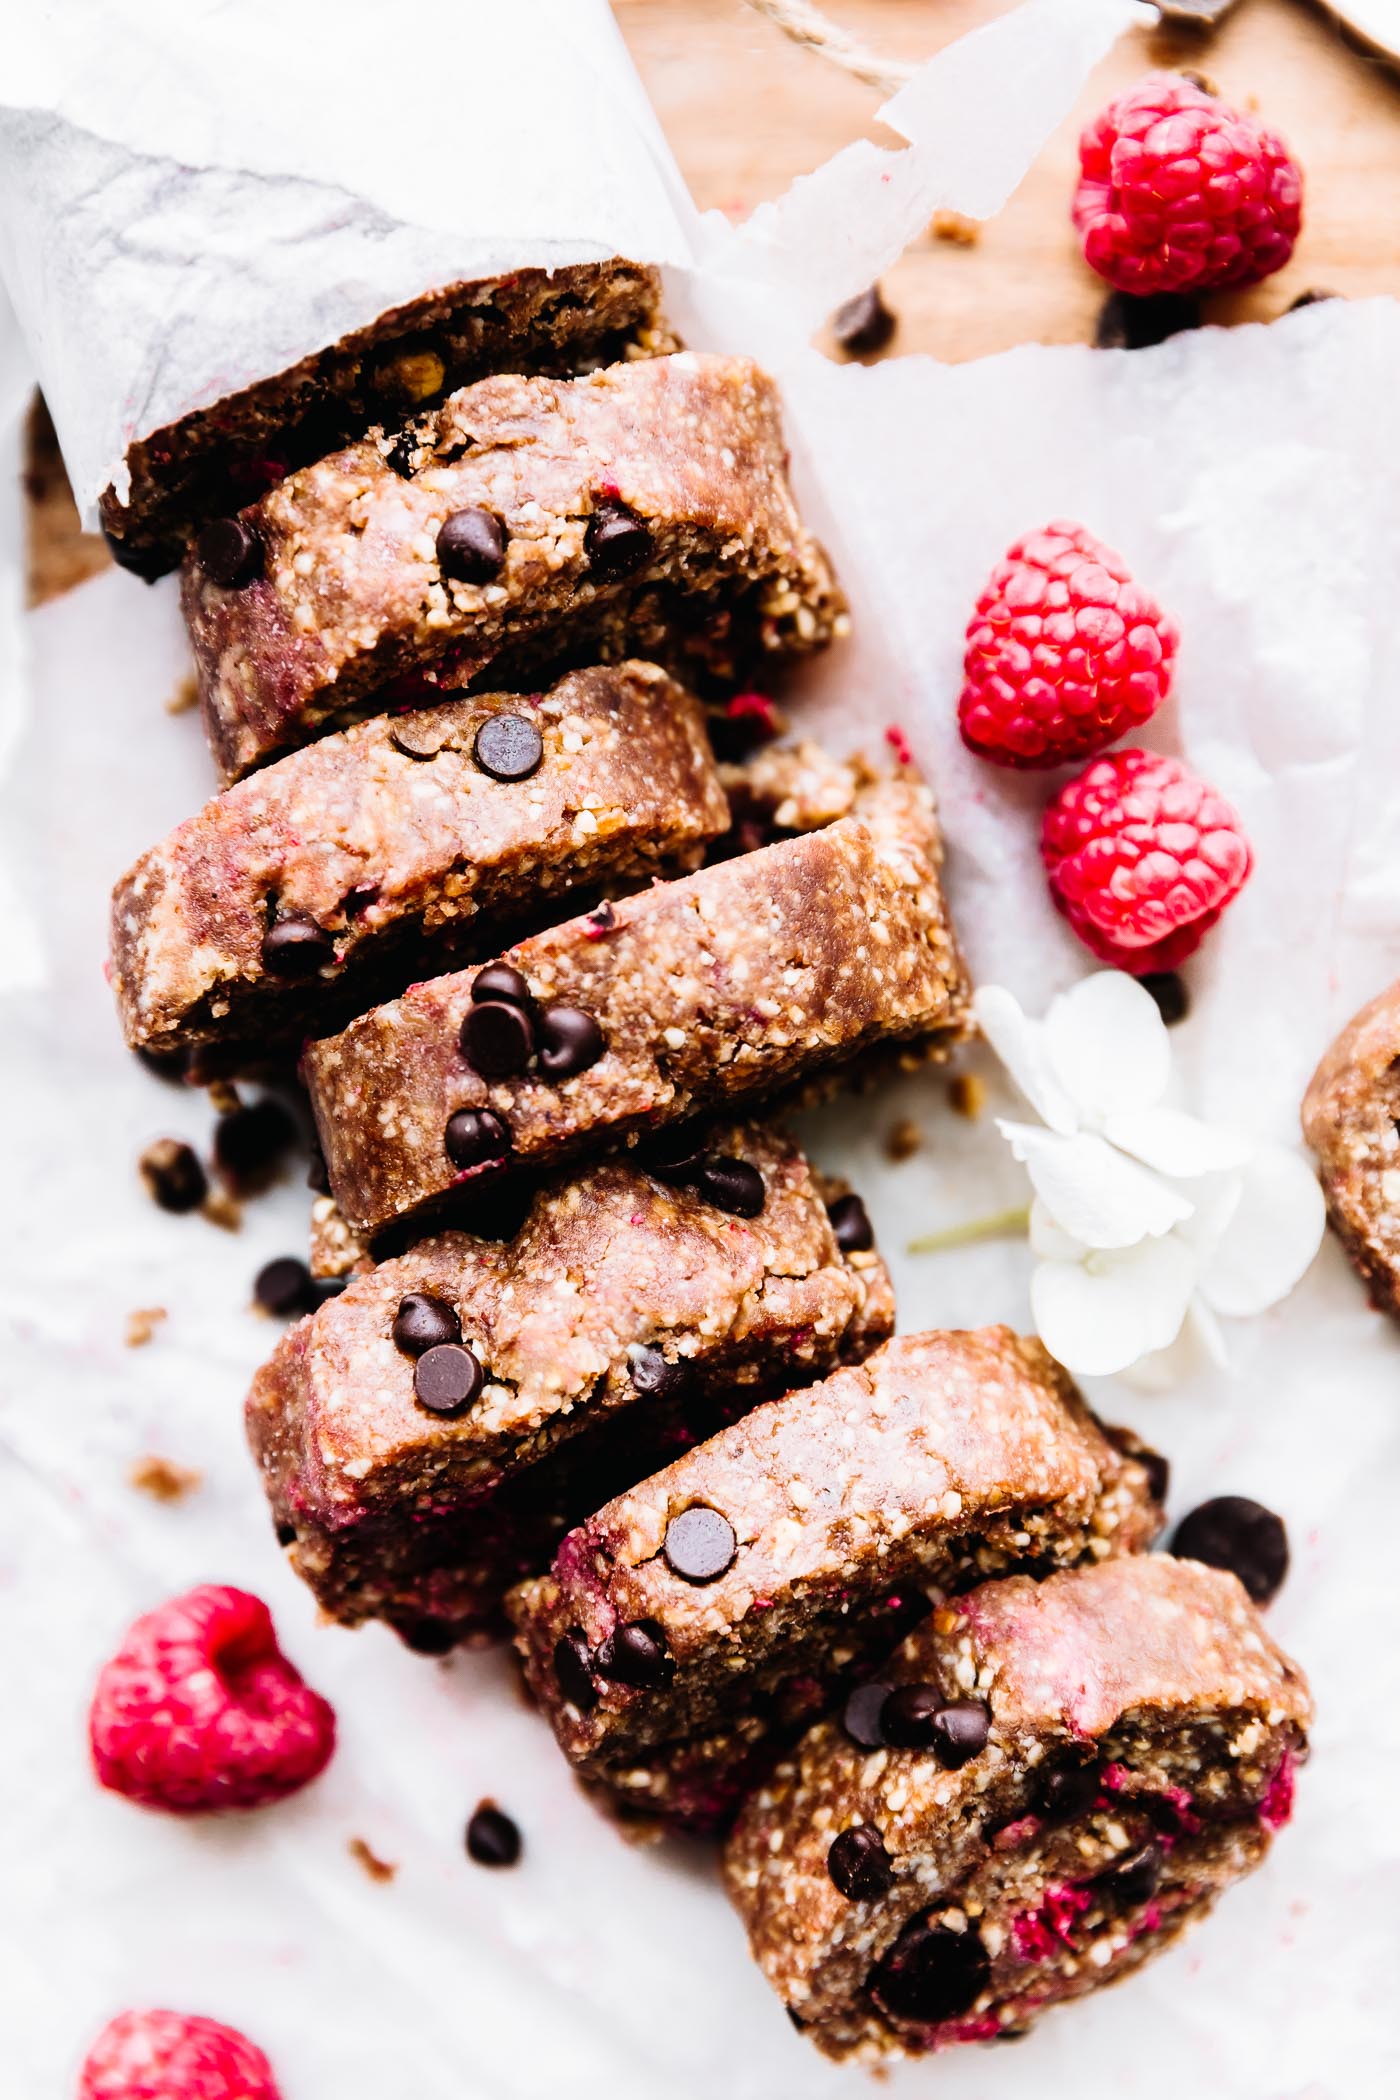 This slice and eat edible cookie dough recipe features fresh raspberries and vegan dark chocolate chips. Eggless cookie dough is a sweet treat for Valentine's Day! #cookiedough #healthy #vegan #chocolate #dessert